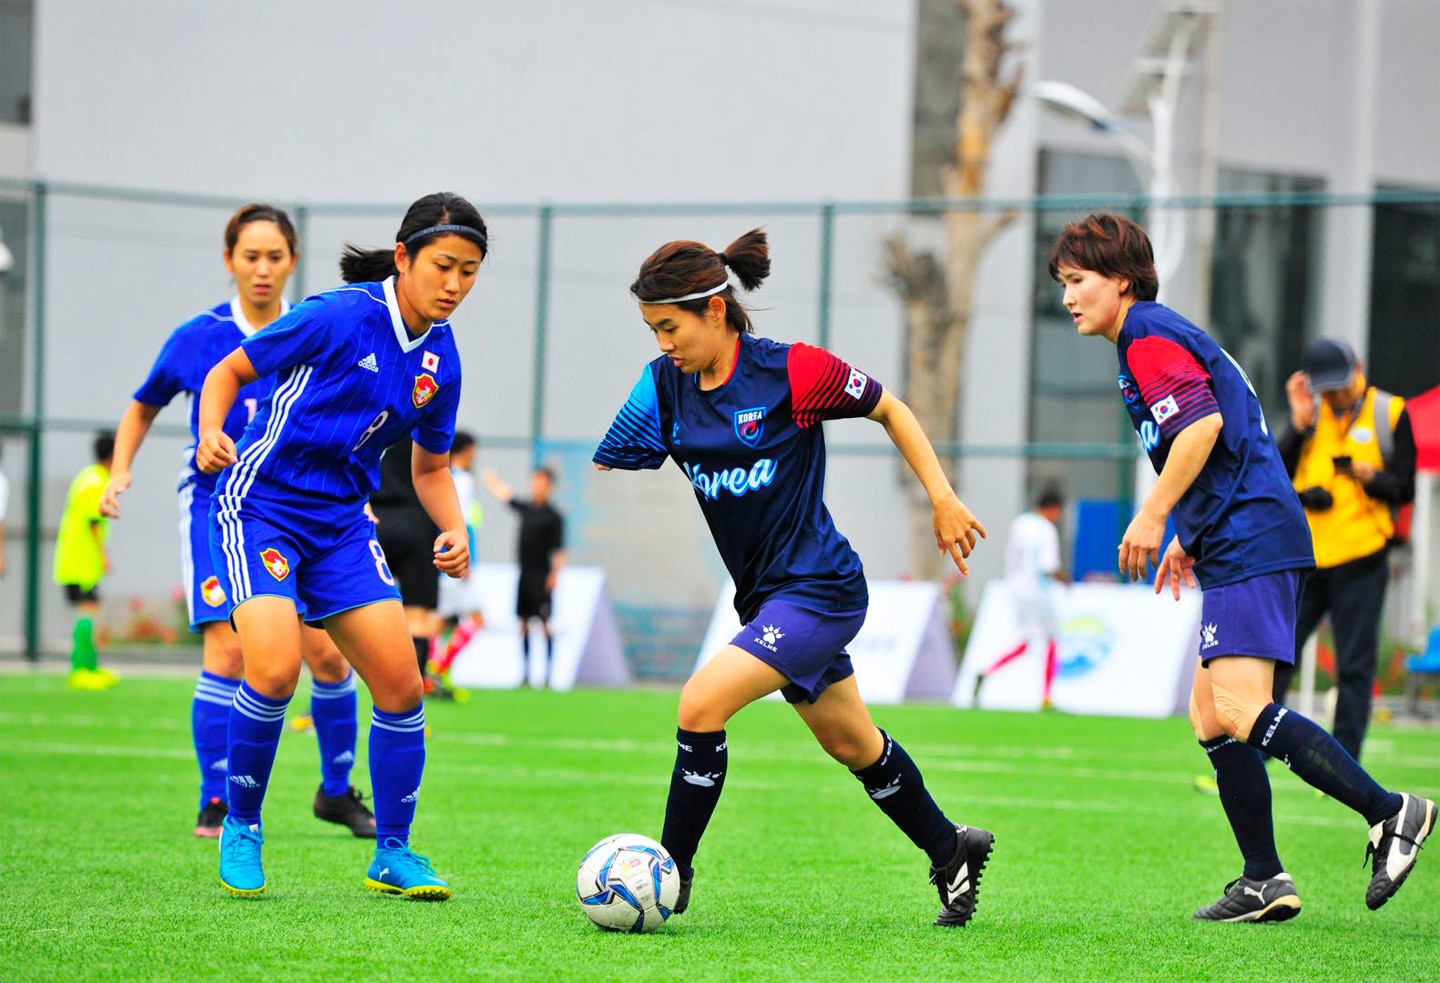 photo: Volunteer activities at Mitsubishi Friendship Cup soccer tournament for people with disabilities